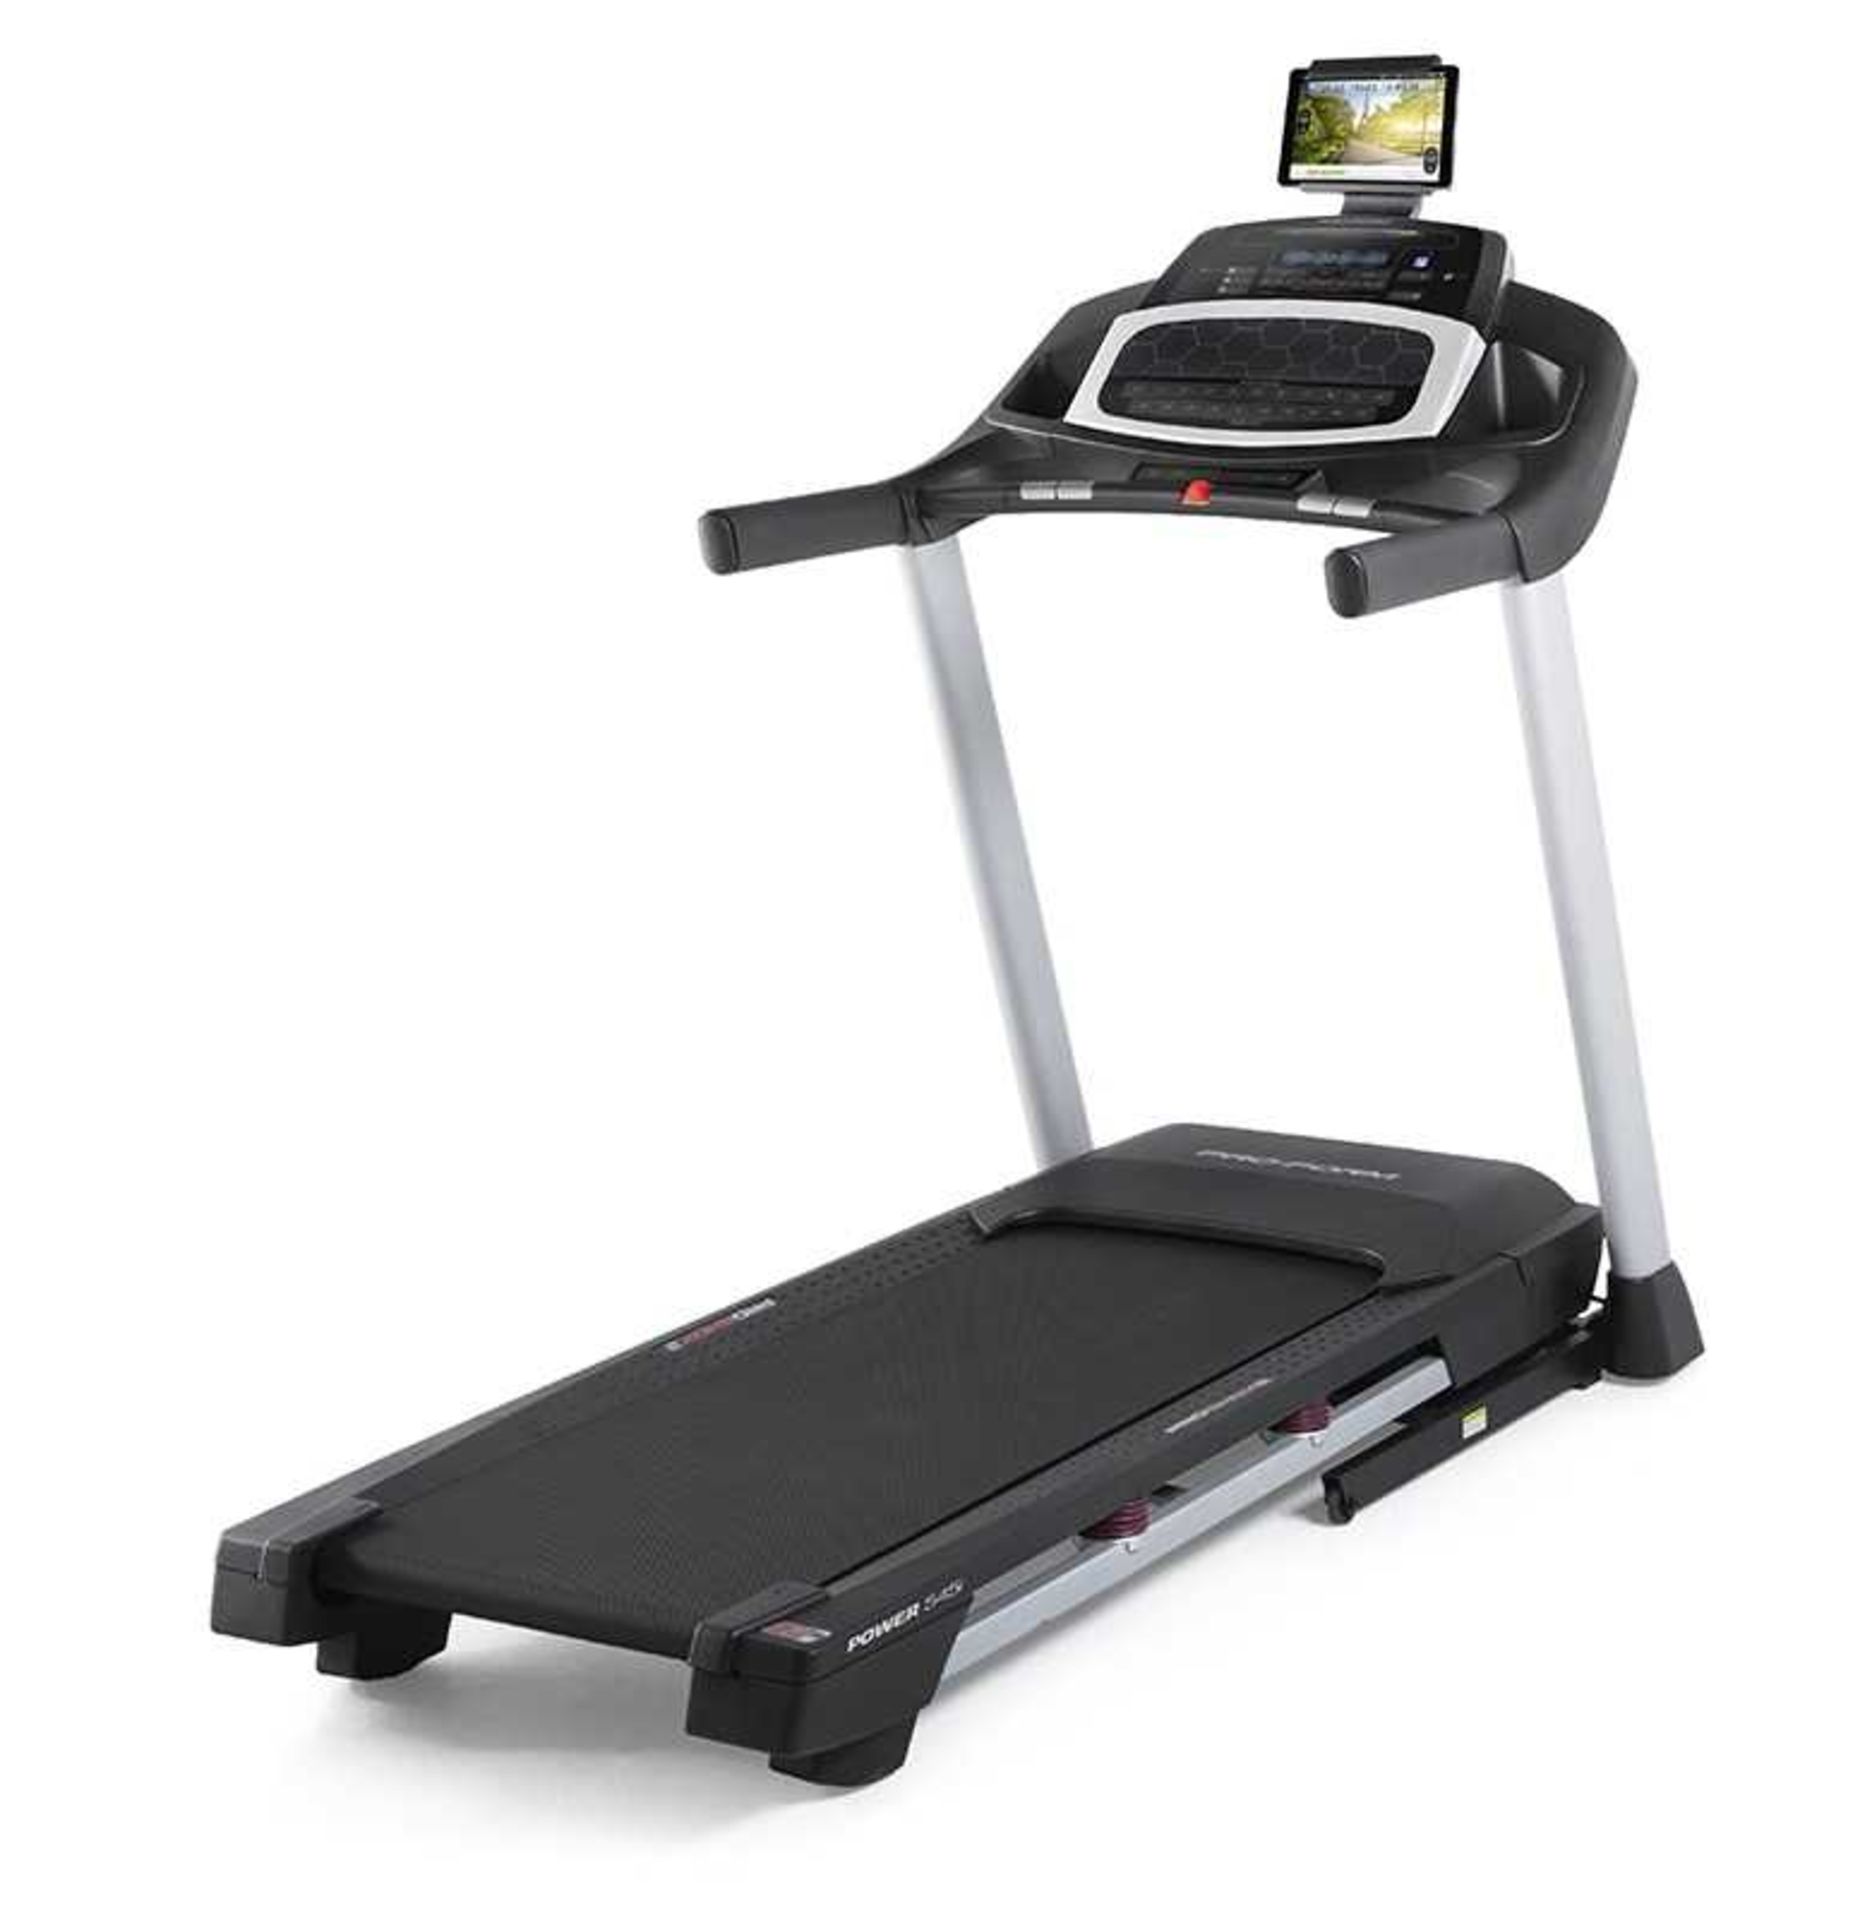 VAT 1 x Sweatband Proform Power 545i Treadmill BLACK/SILVER RRP £789.00This lot is a completely